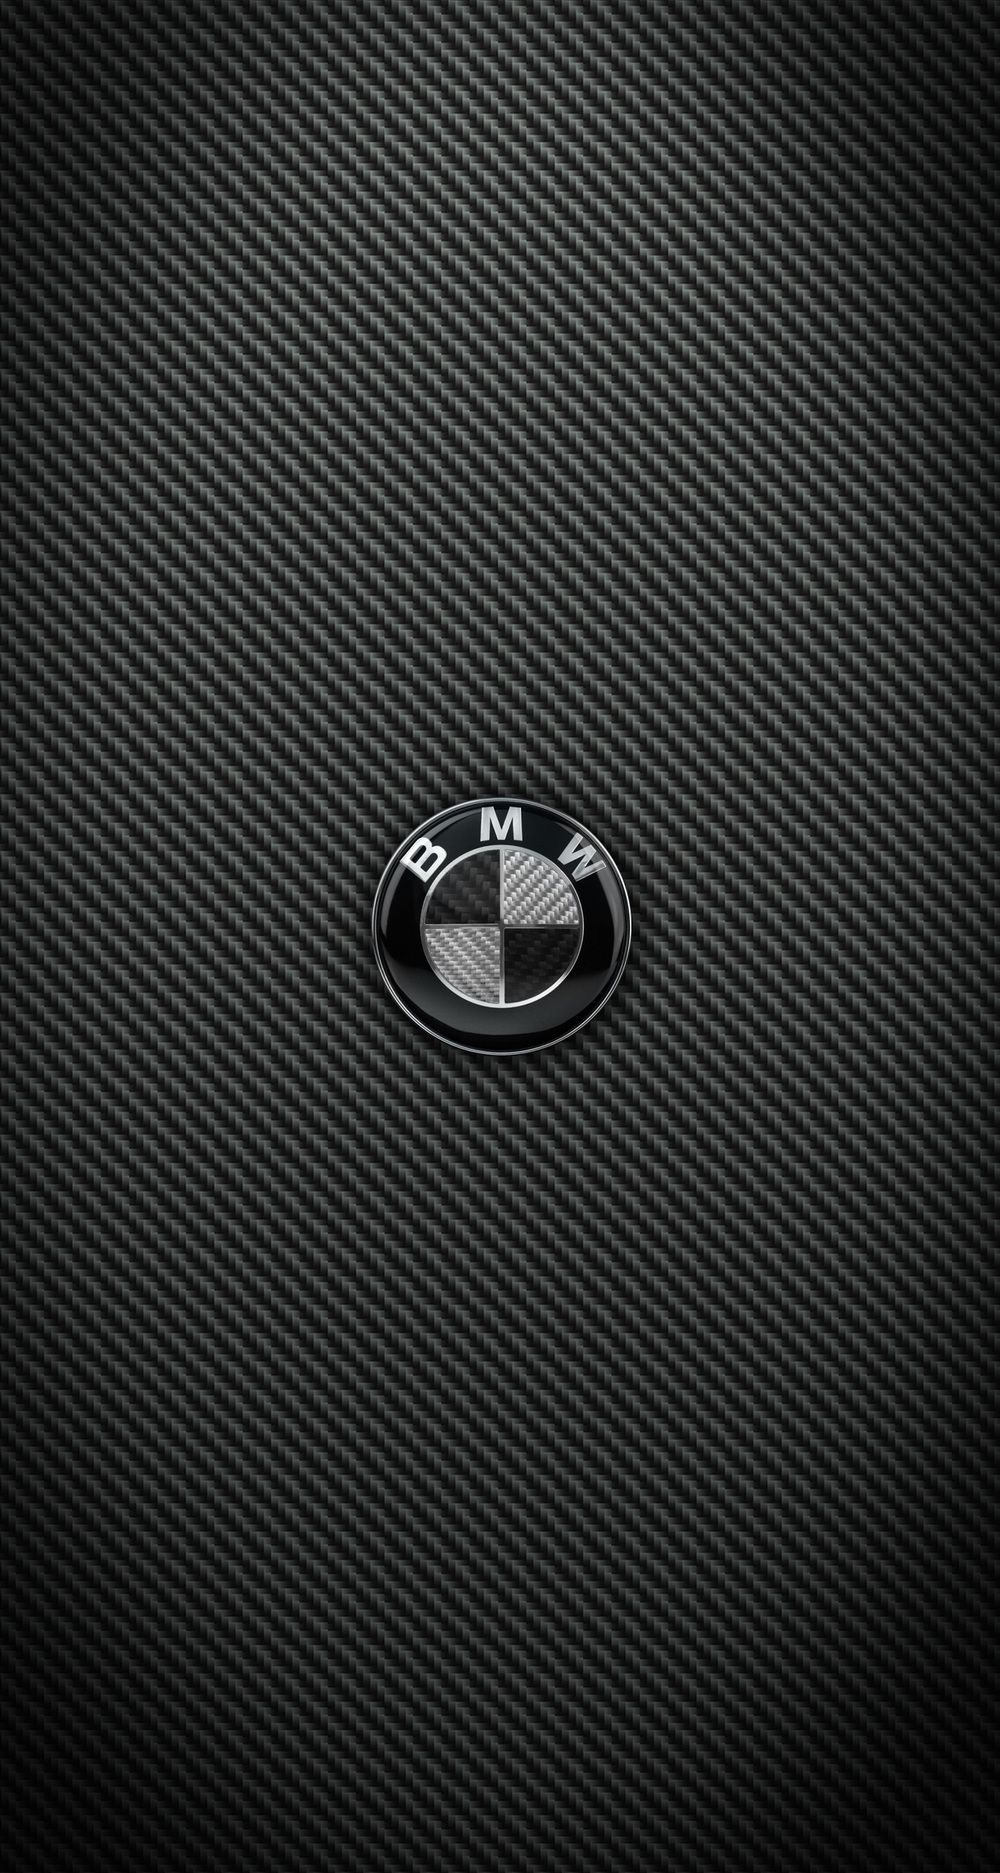 Carbon Fiber BMW and M Power iPhone wallpapers for iPhone 6 Plus ...